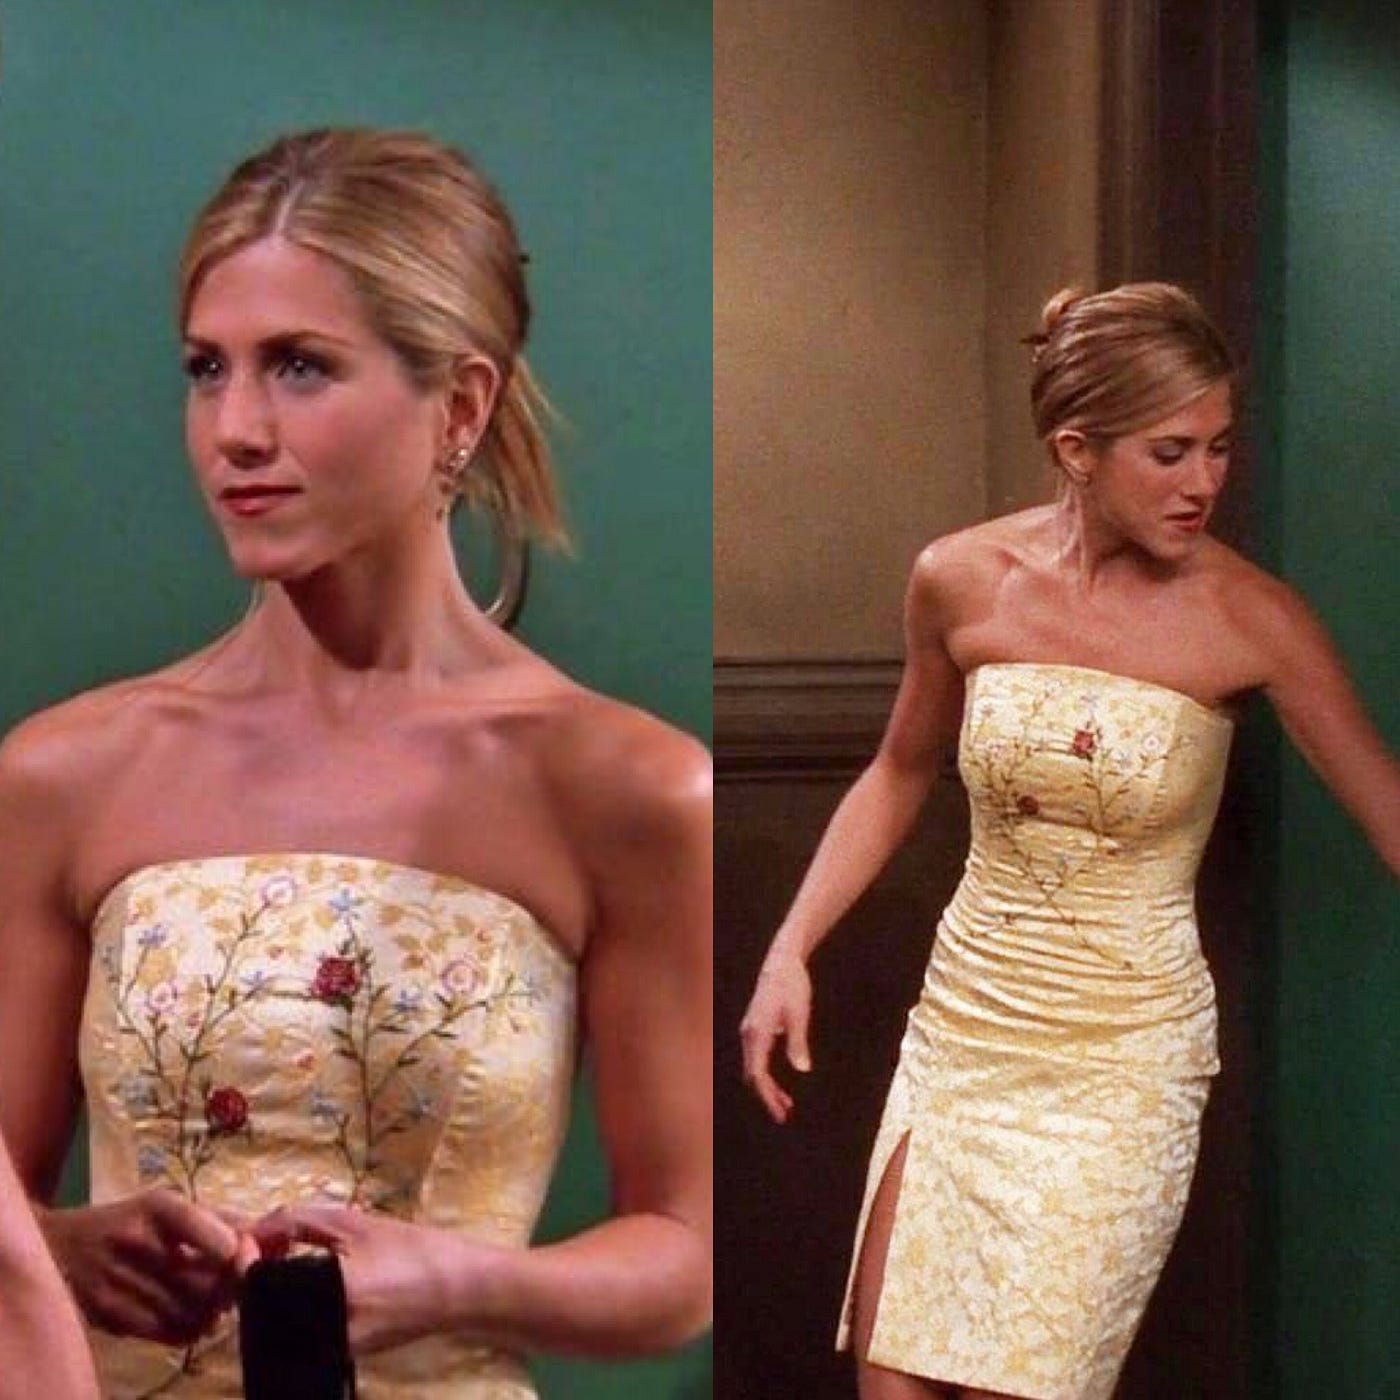 Rachel had the most iconic outfits..these outfits are timeless